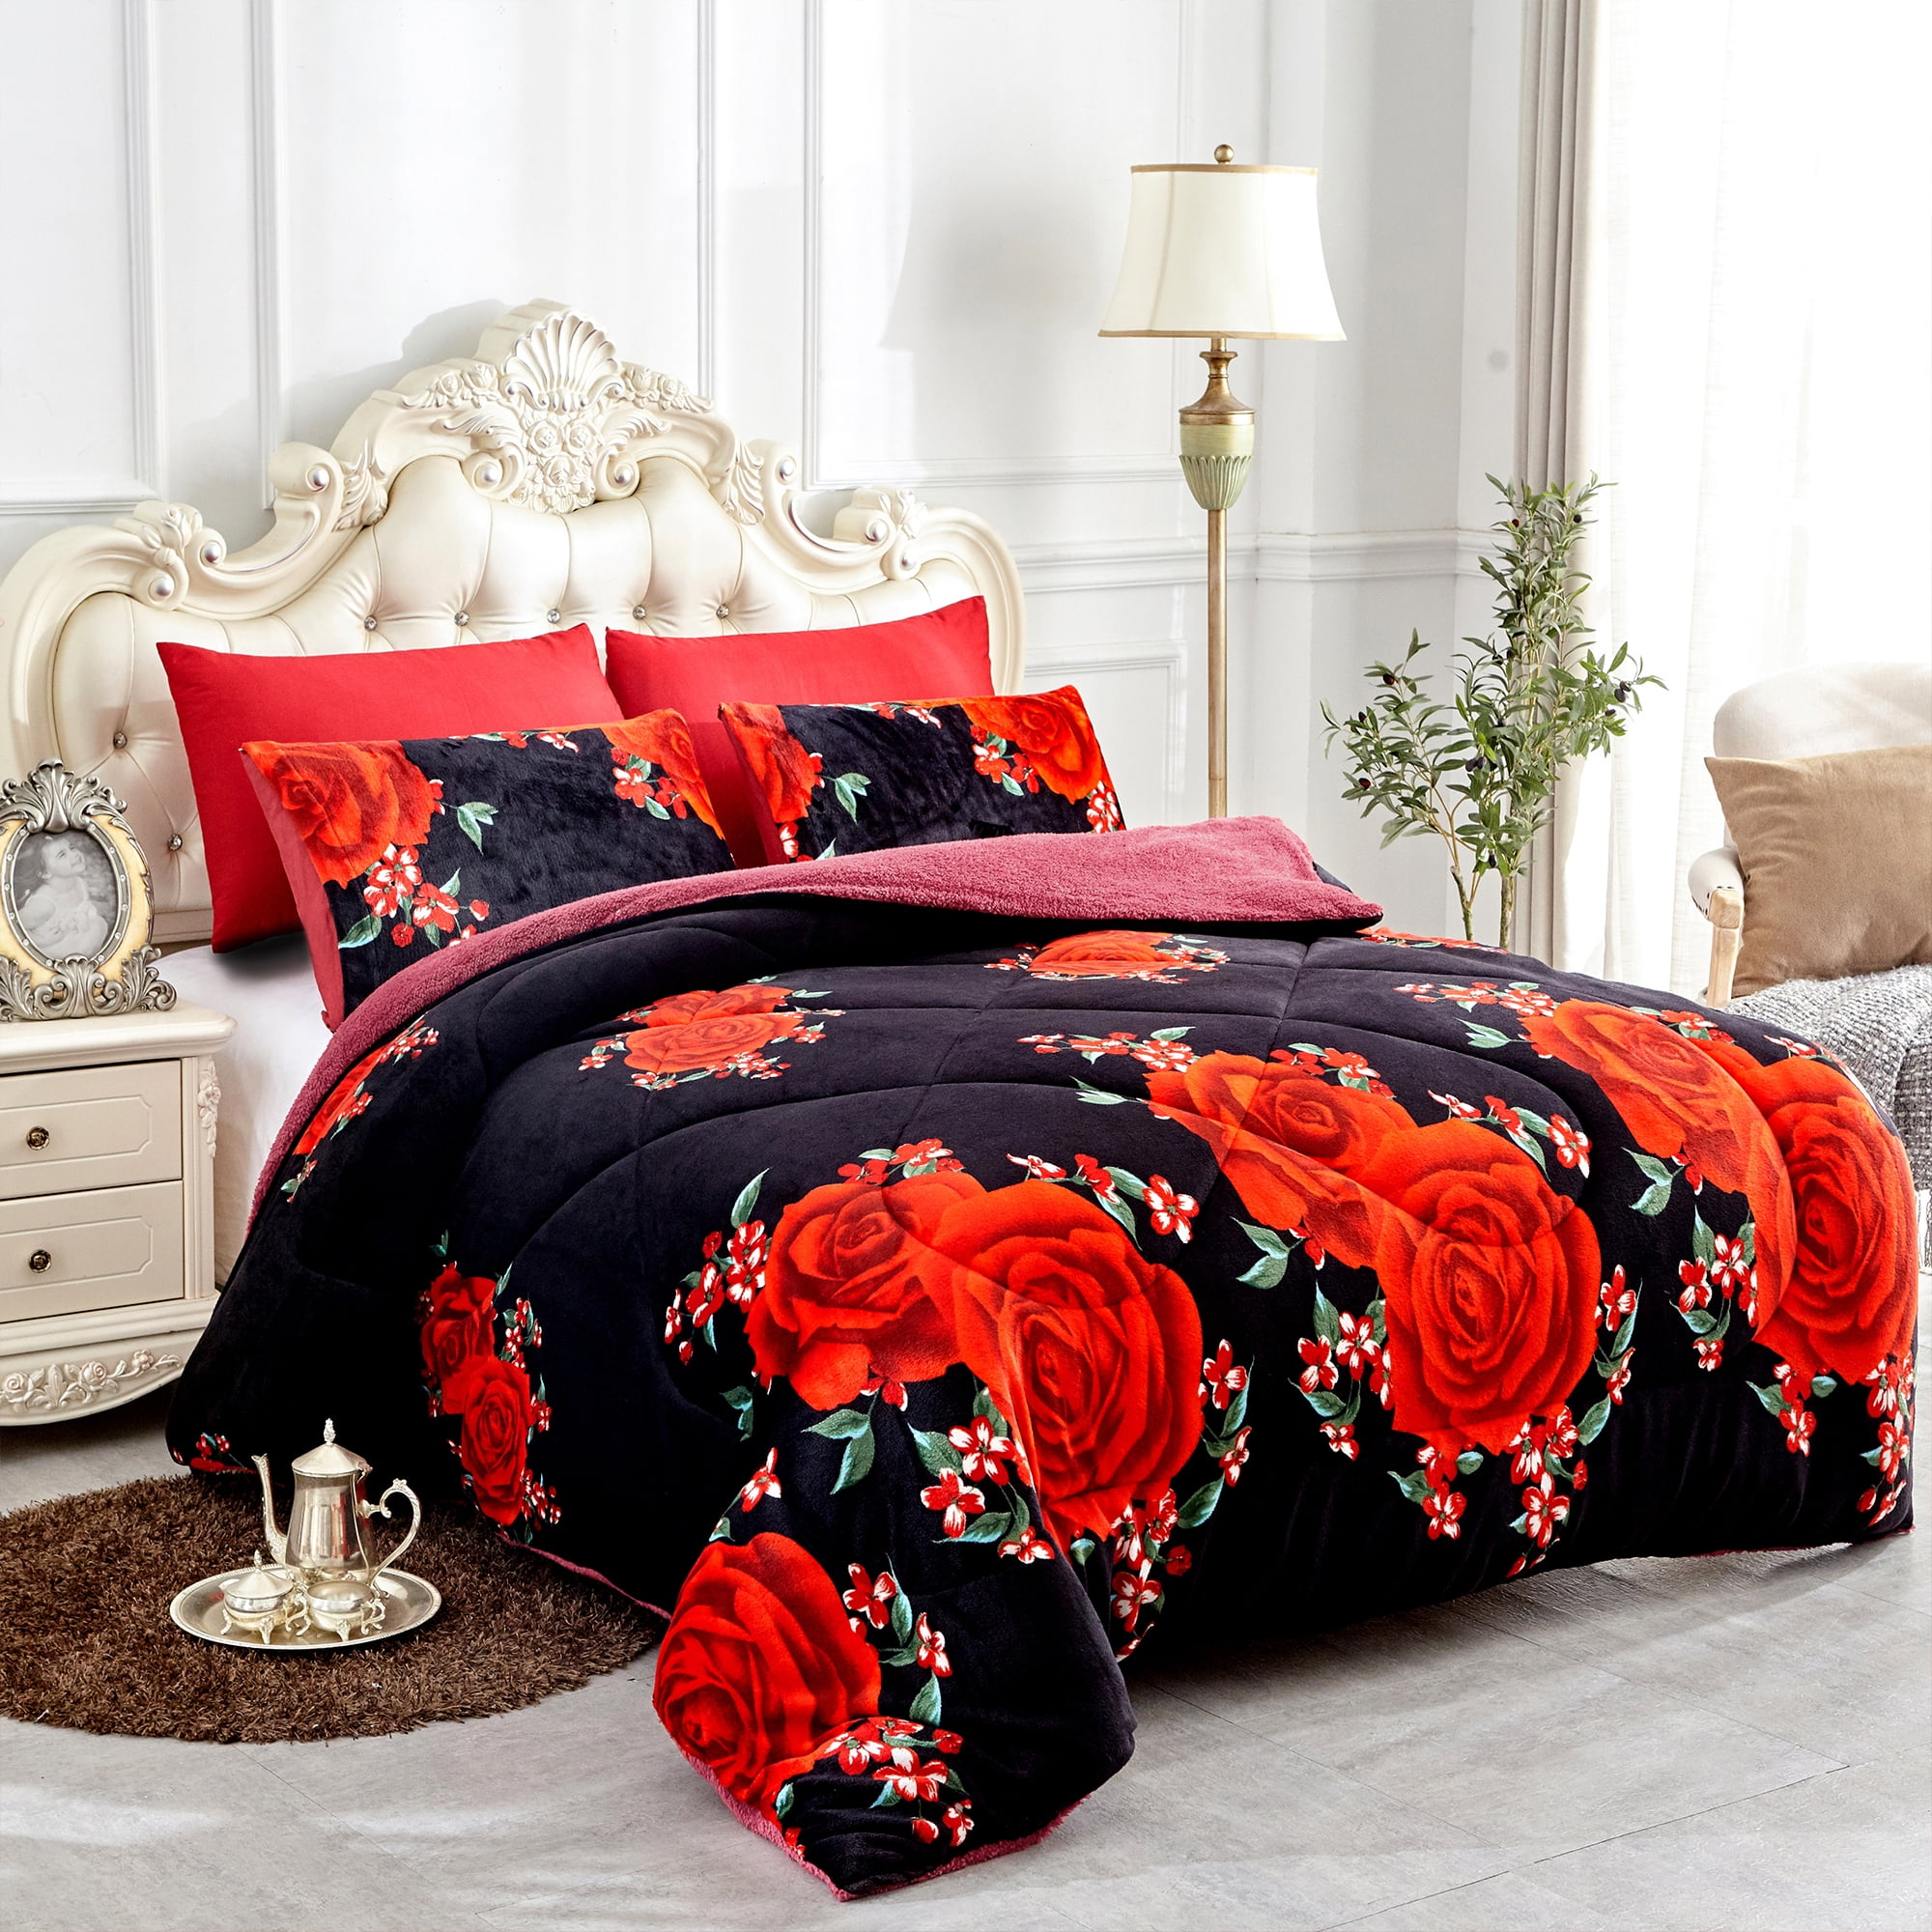 Details about   New Down Alt Tan Red Plaid Reverse 4 pcs Soft Sherpa Comforter King Queen Set 